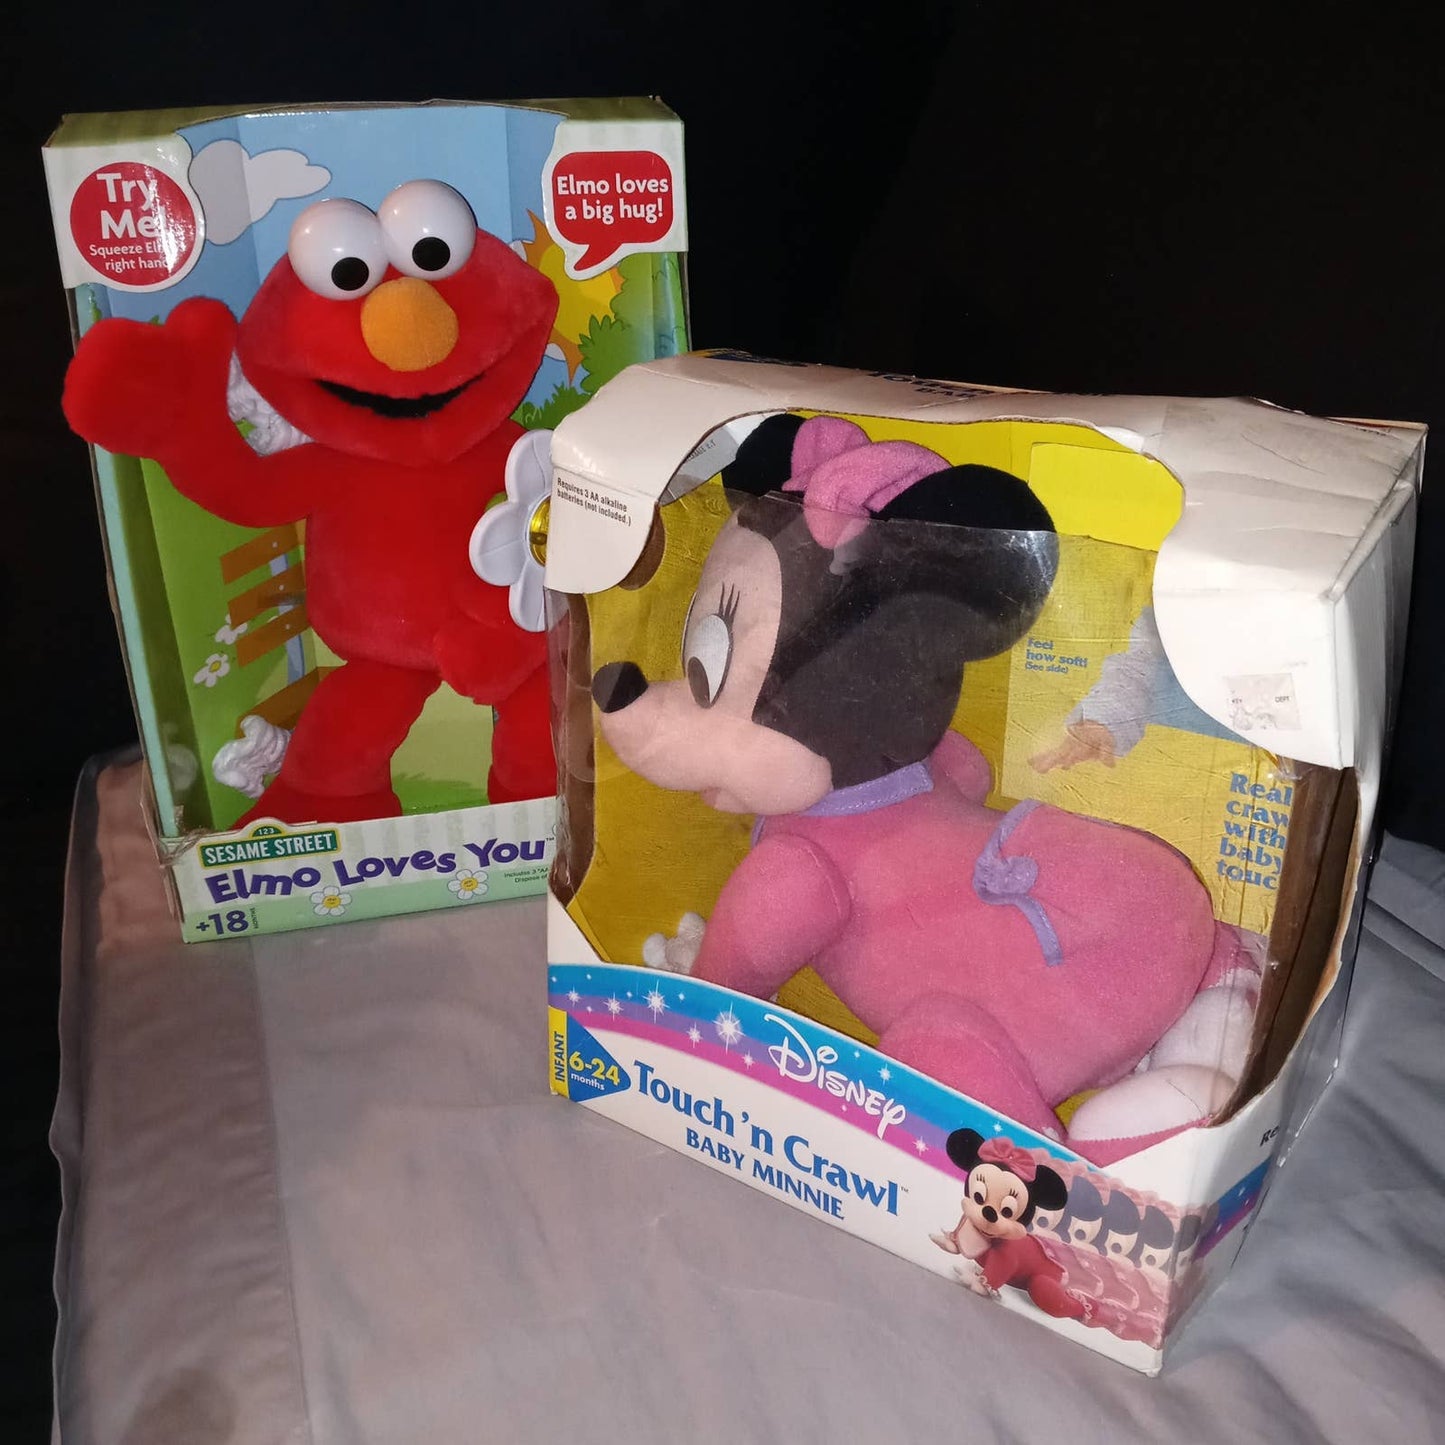 New Elmo Loves You AND Baby Minnie Touch and Crawl